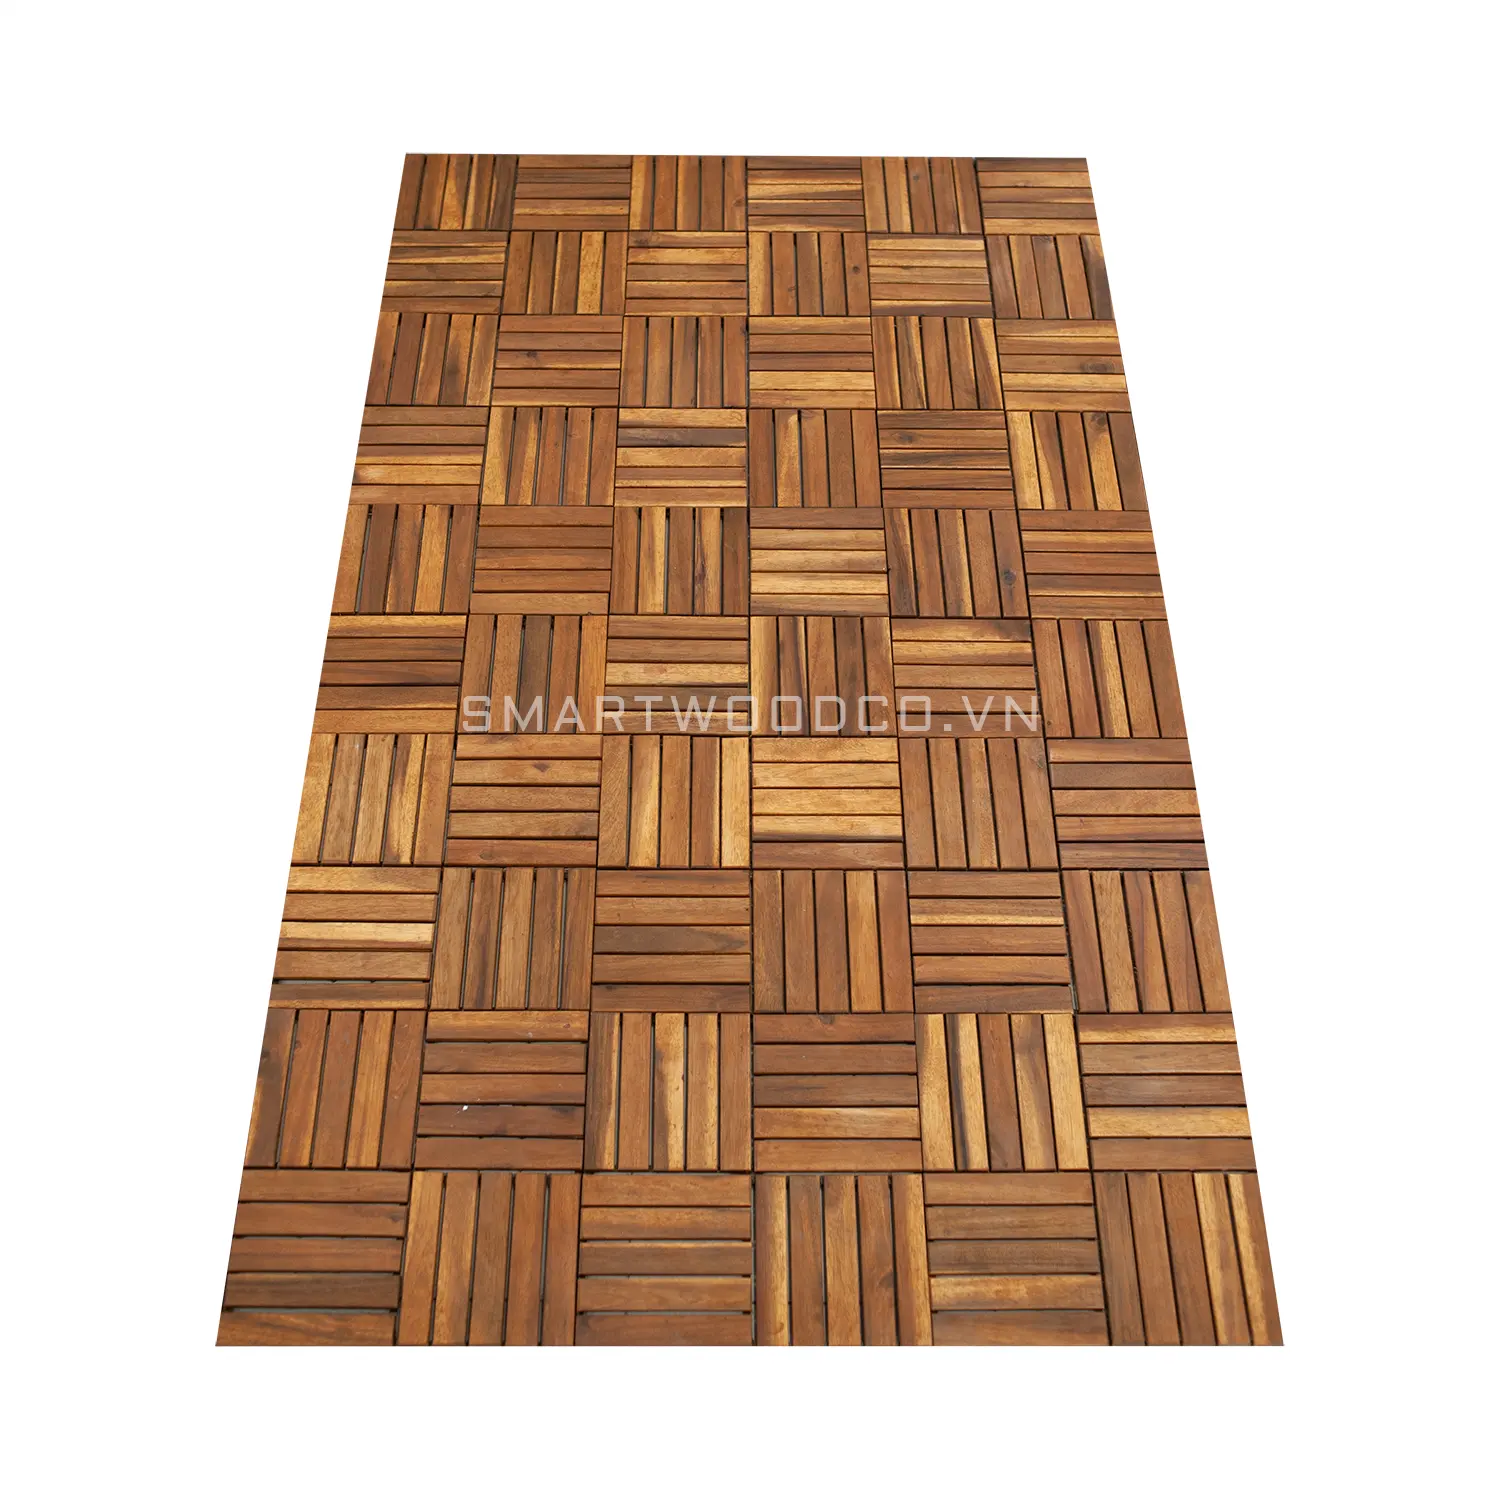 ANTIQUE AND LUXURY FURNITURE FOR ACACIA DECKING TILES USING OUTDOOR/ INDOOR PLACES